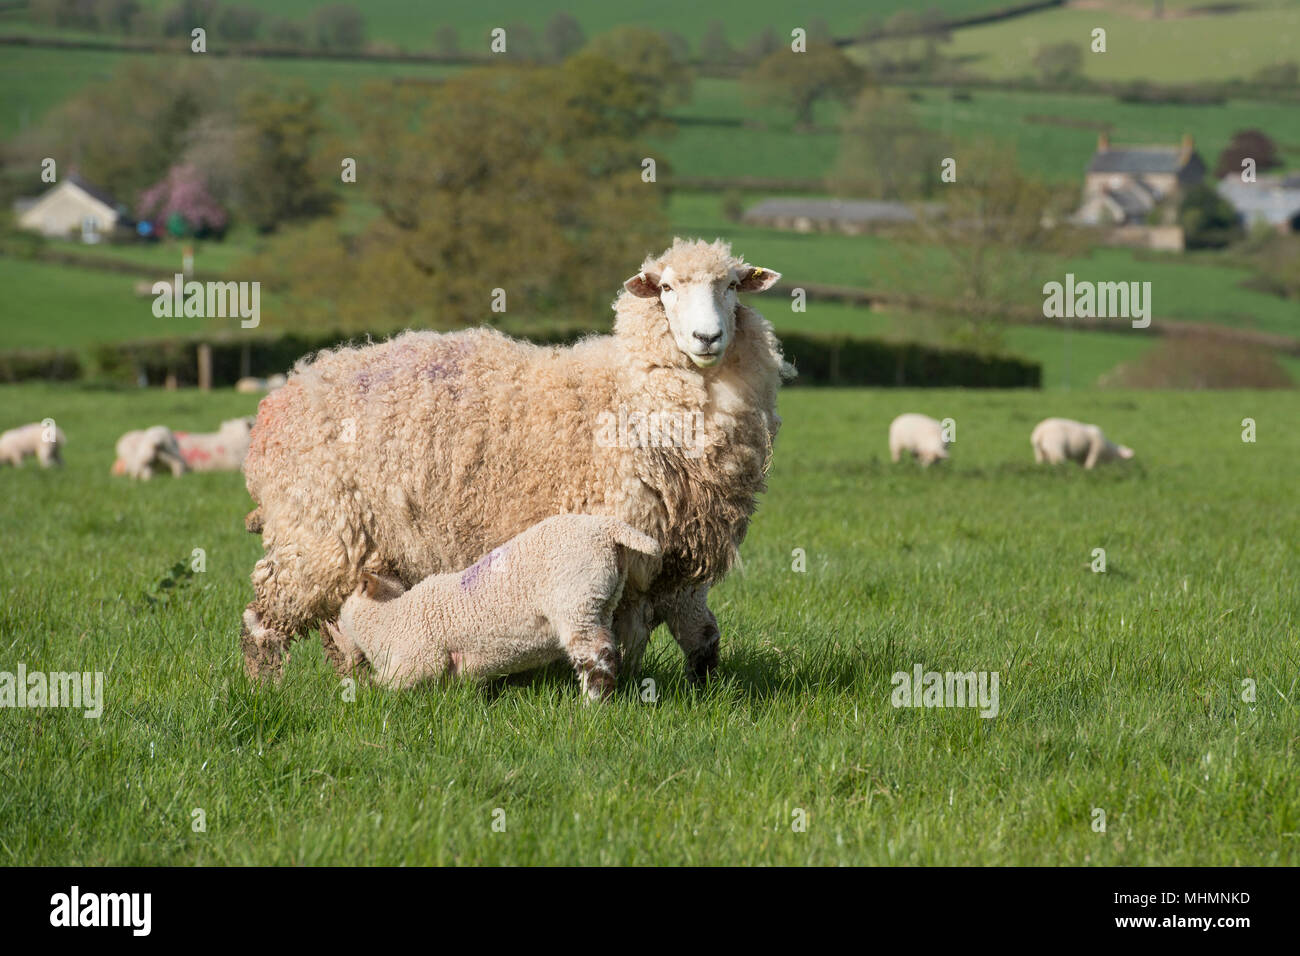 ewes and lambs in countryside Stock Photo